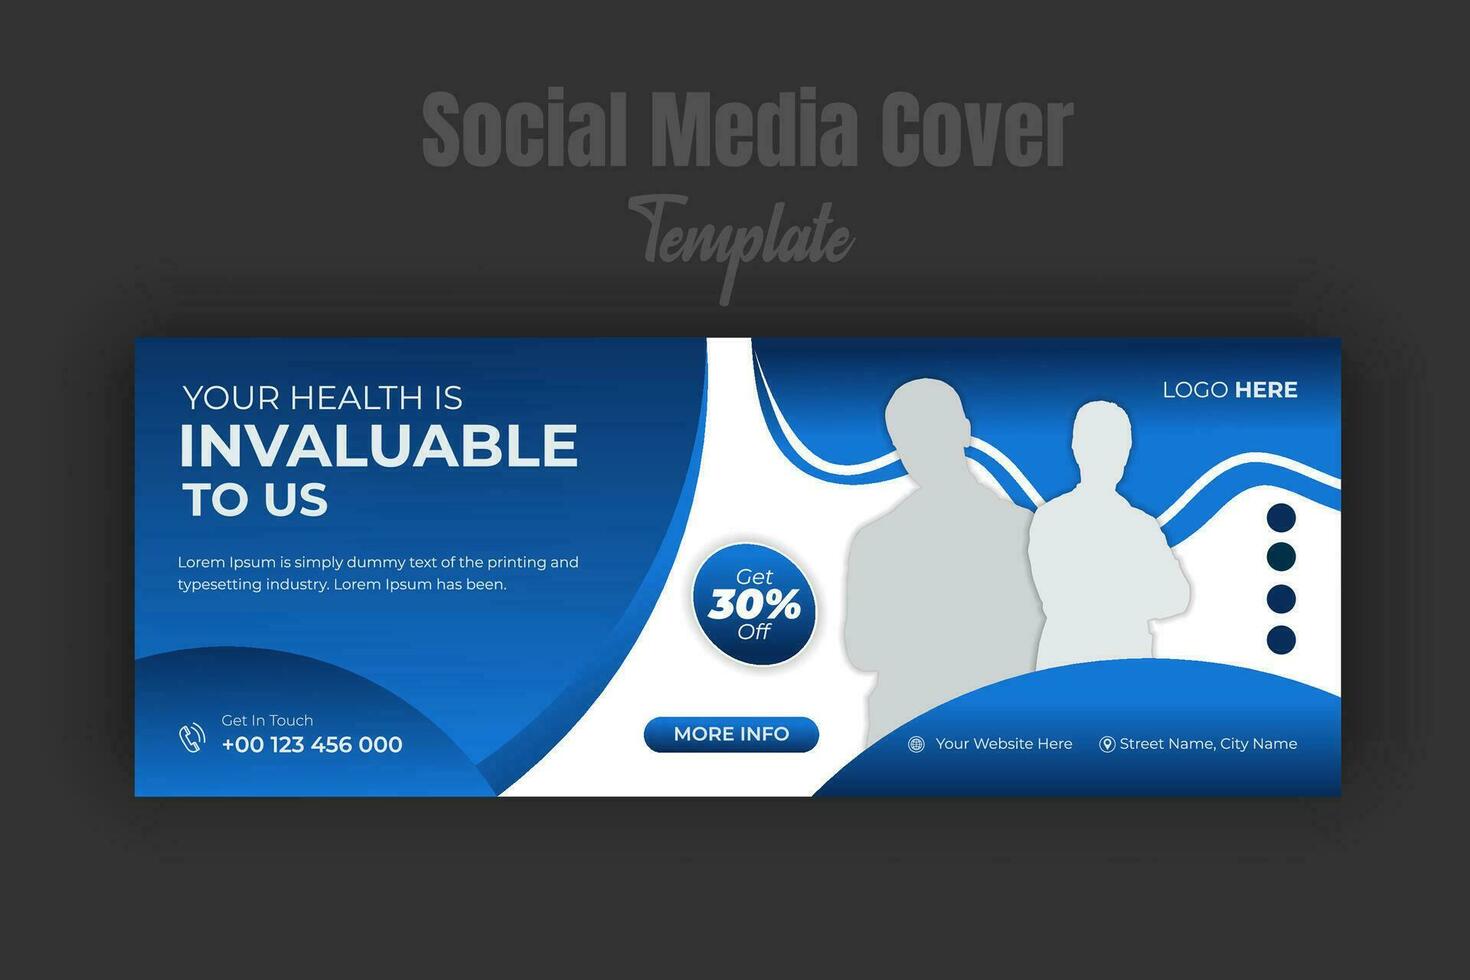 Geometric medical and healthcare service promotion or web banner or social media post template design on timeline cover with blue and orange shapes and photo place holder space vector